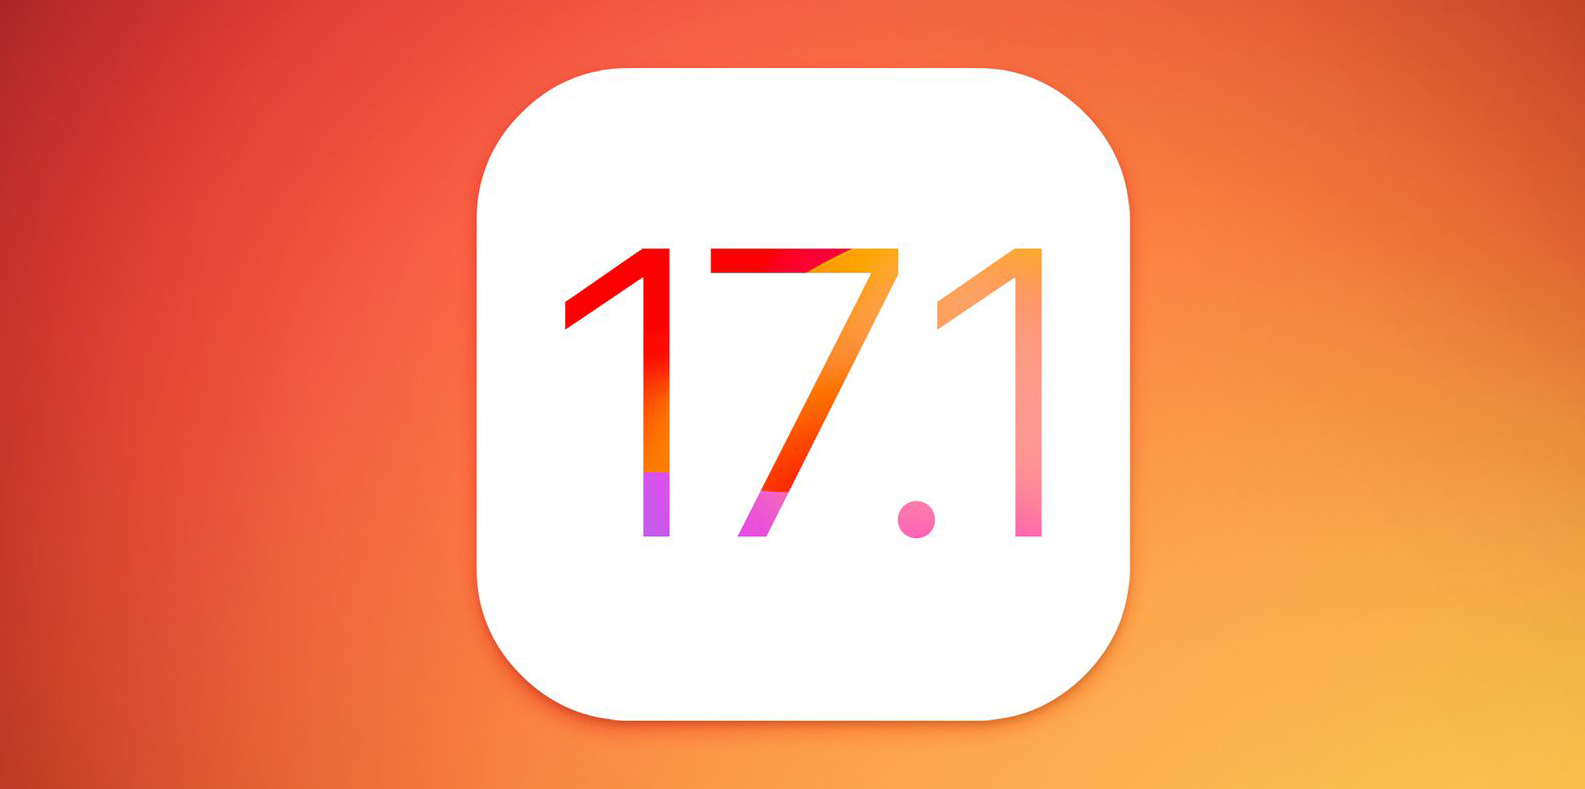 ios-17-1-is-coming-1